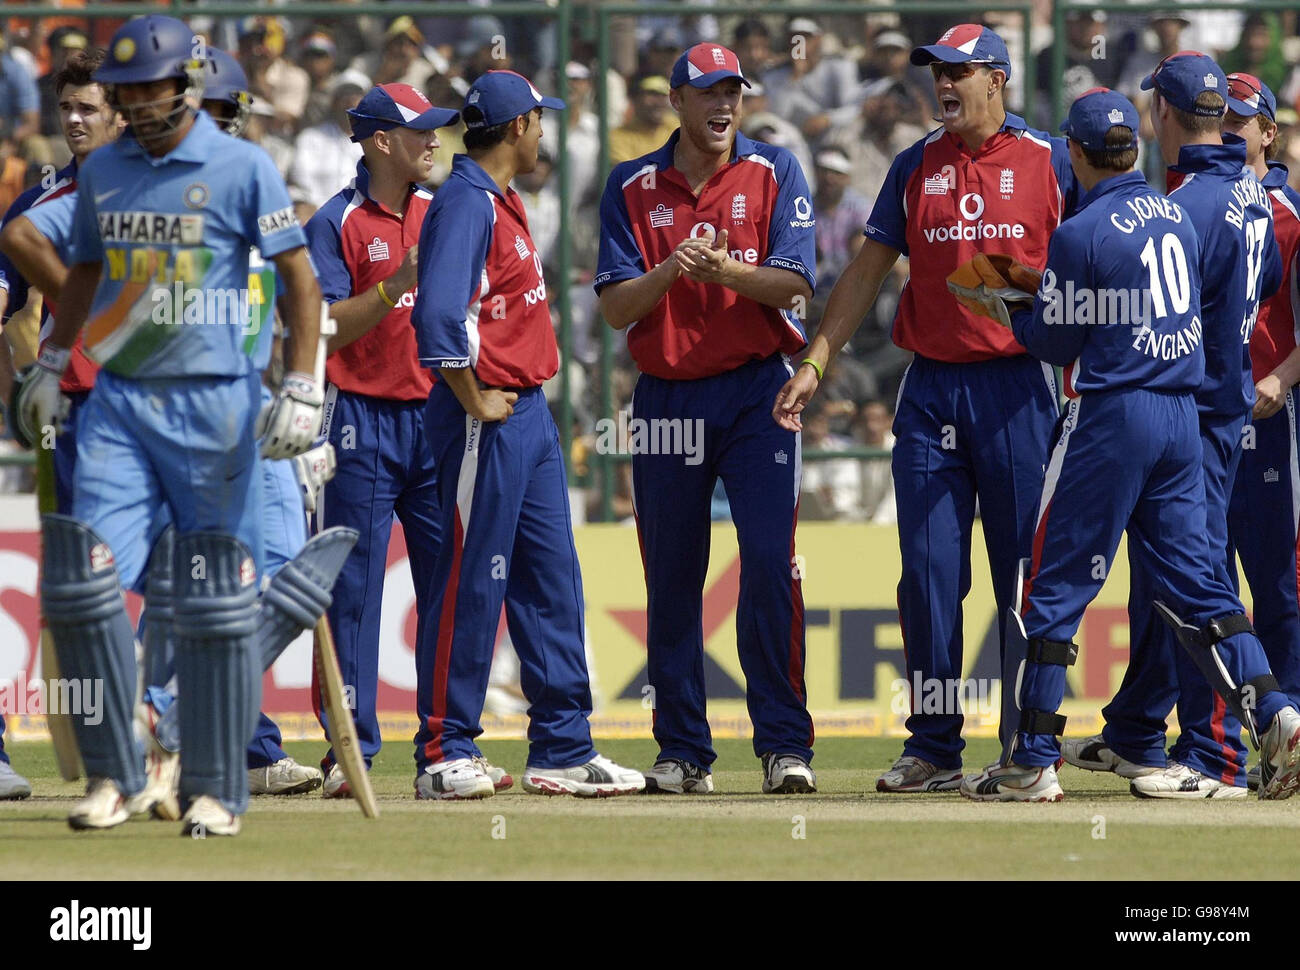 England celebrate the run out of Indian batsman Mohammed Kaif (L) during the first One Day International at the Ferozeshah Kotla Grounds, Delhi, India, Tuesday March 28, 2006. PRESS ASSOCIATION Photo. Photo credit should read: Rebecca Naden/PA. Stock Photo